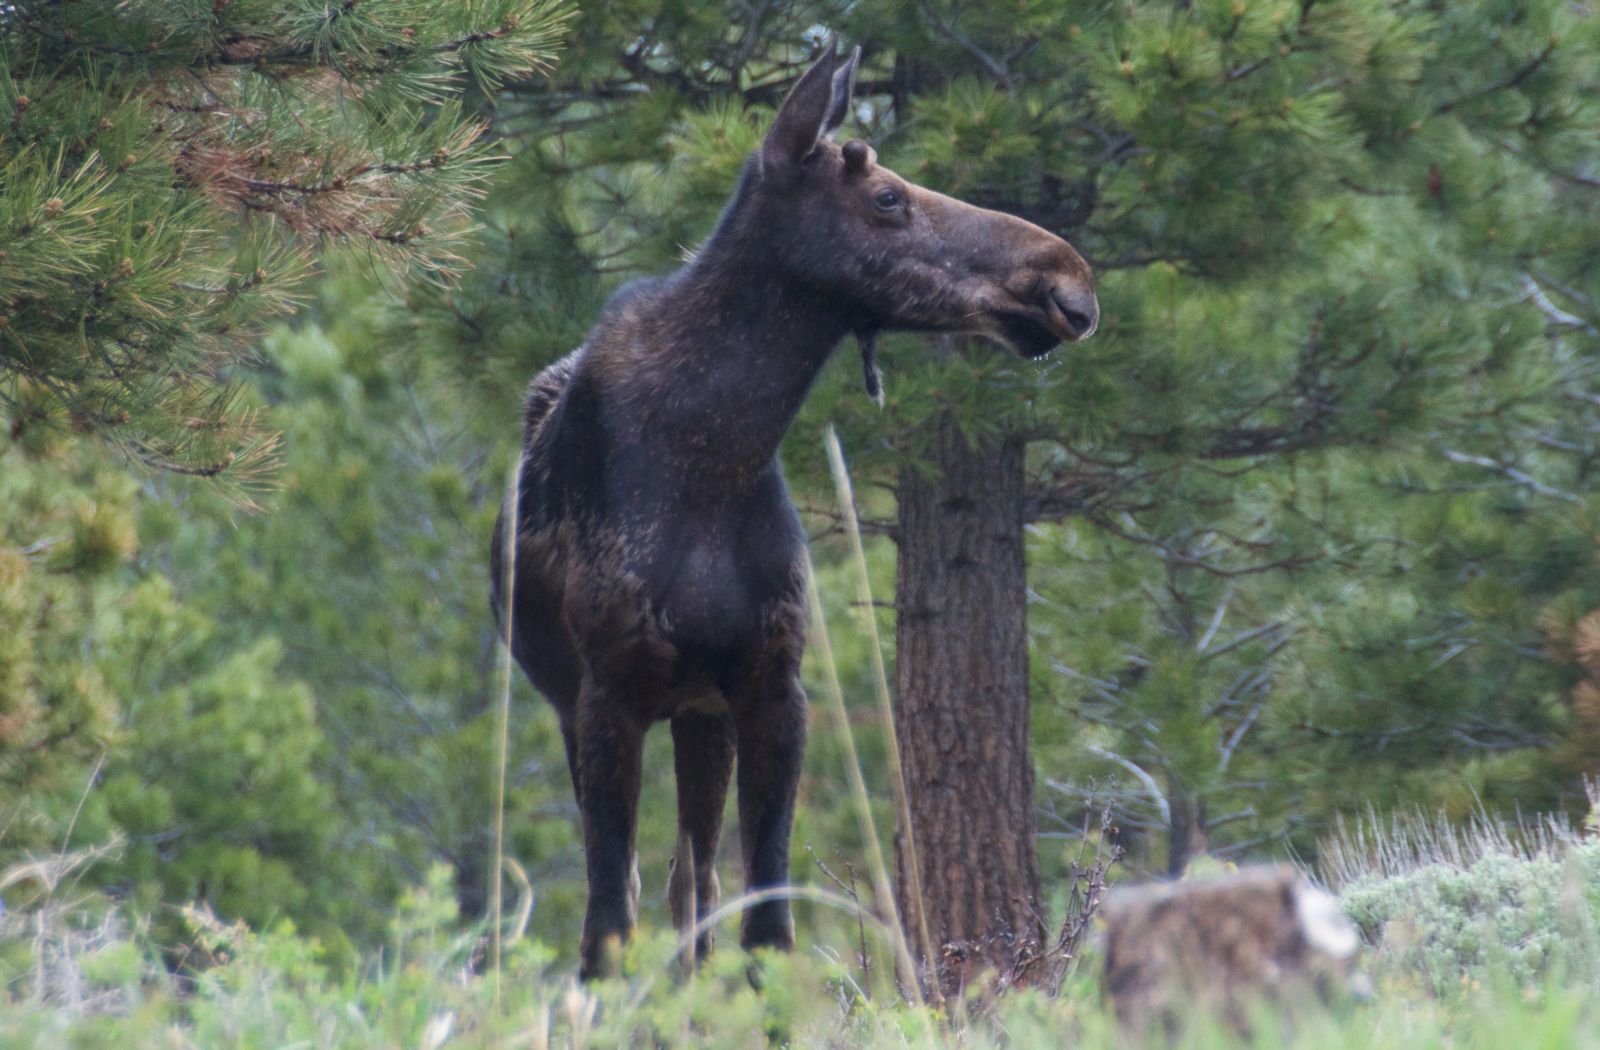 A moose pauses in the Ponderosa pines on the Canyon Rim Trail